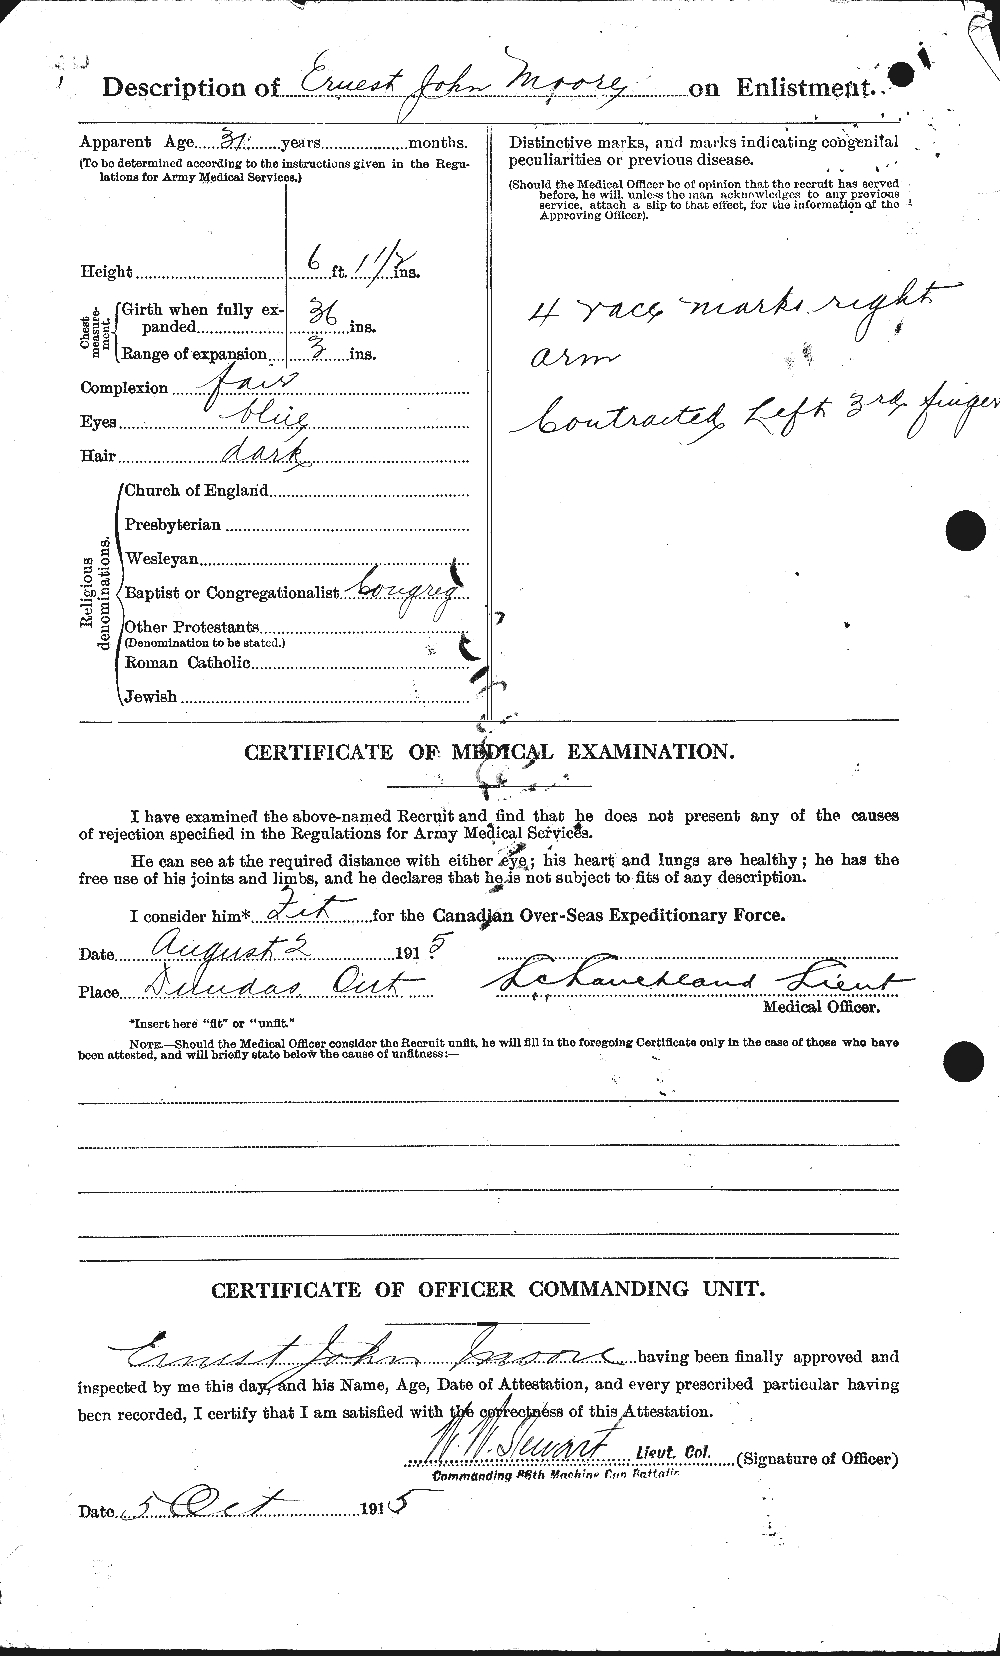 Personnel Records of the First World War - CEF 506672b